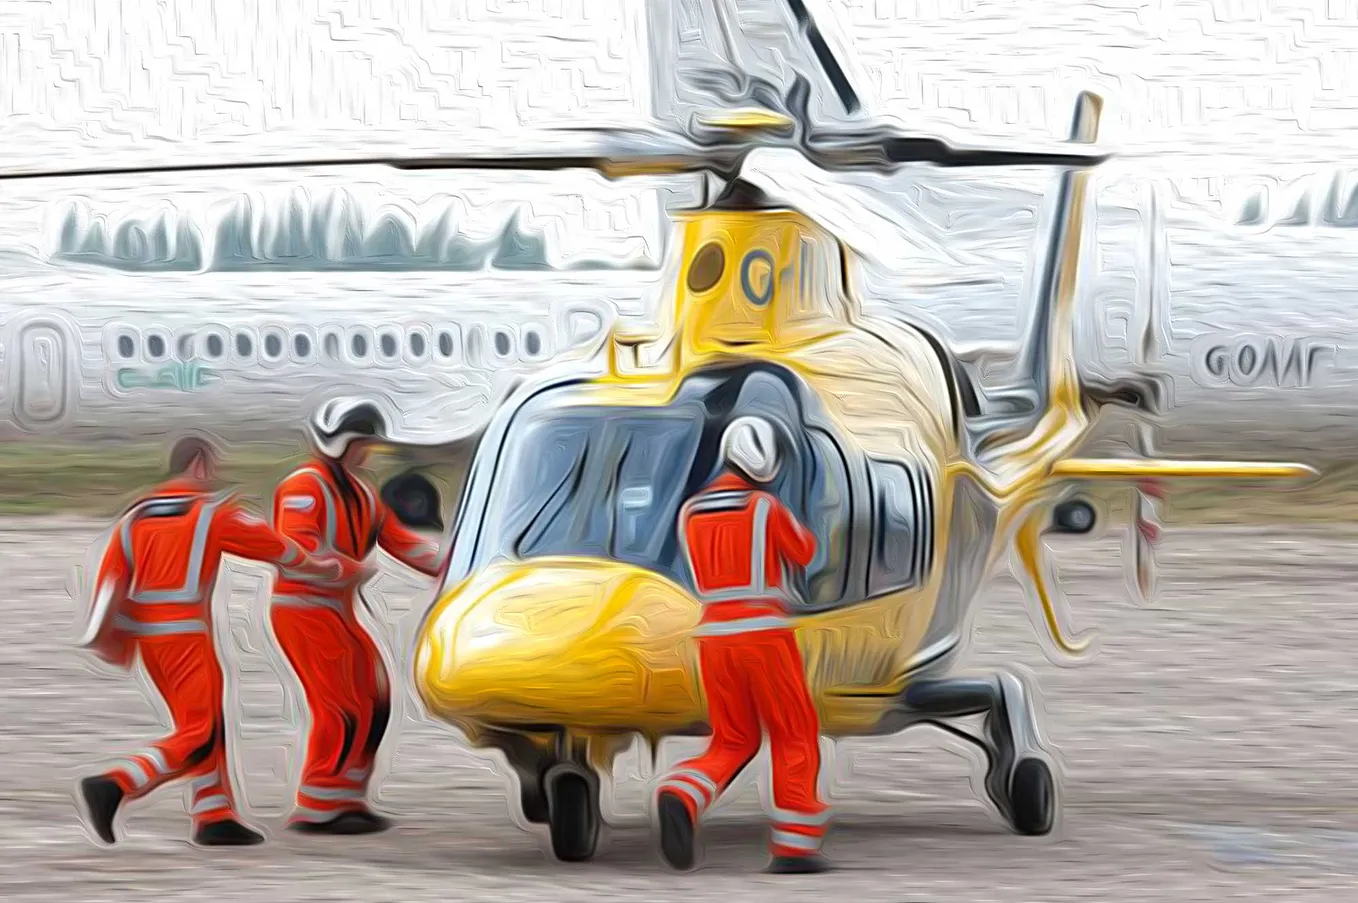 Holding tight as The Air Ambulance Service dies*